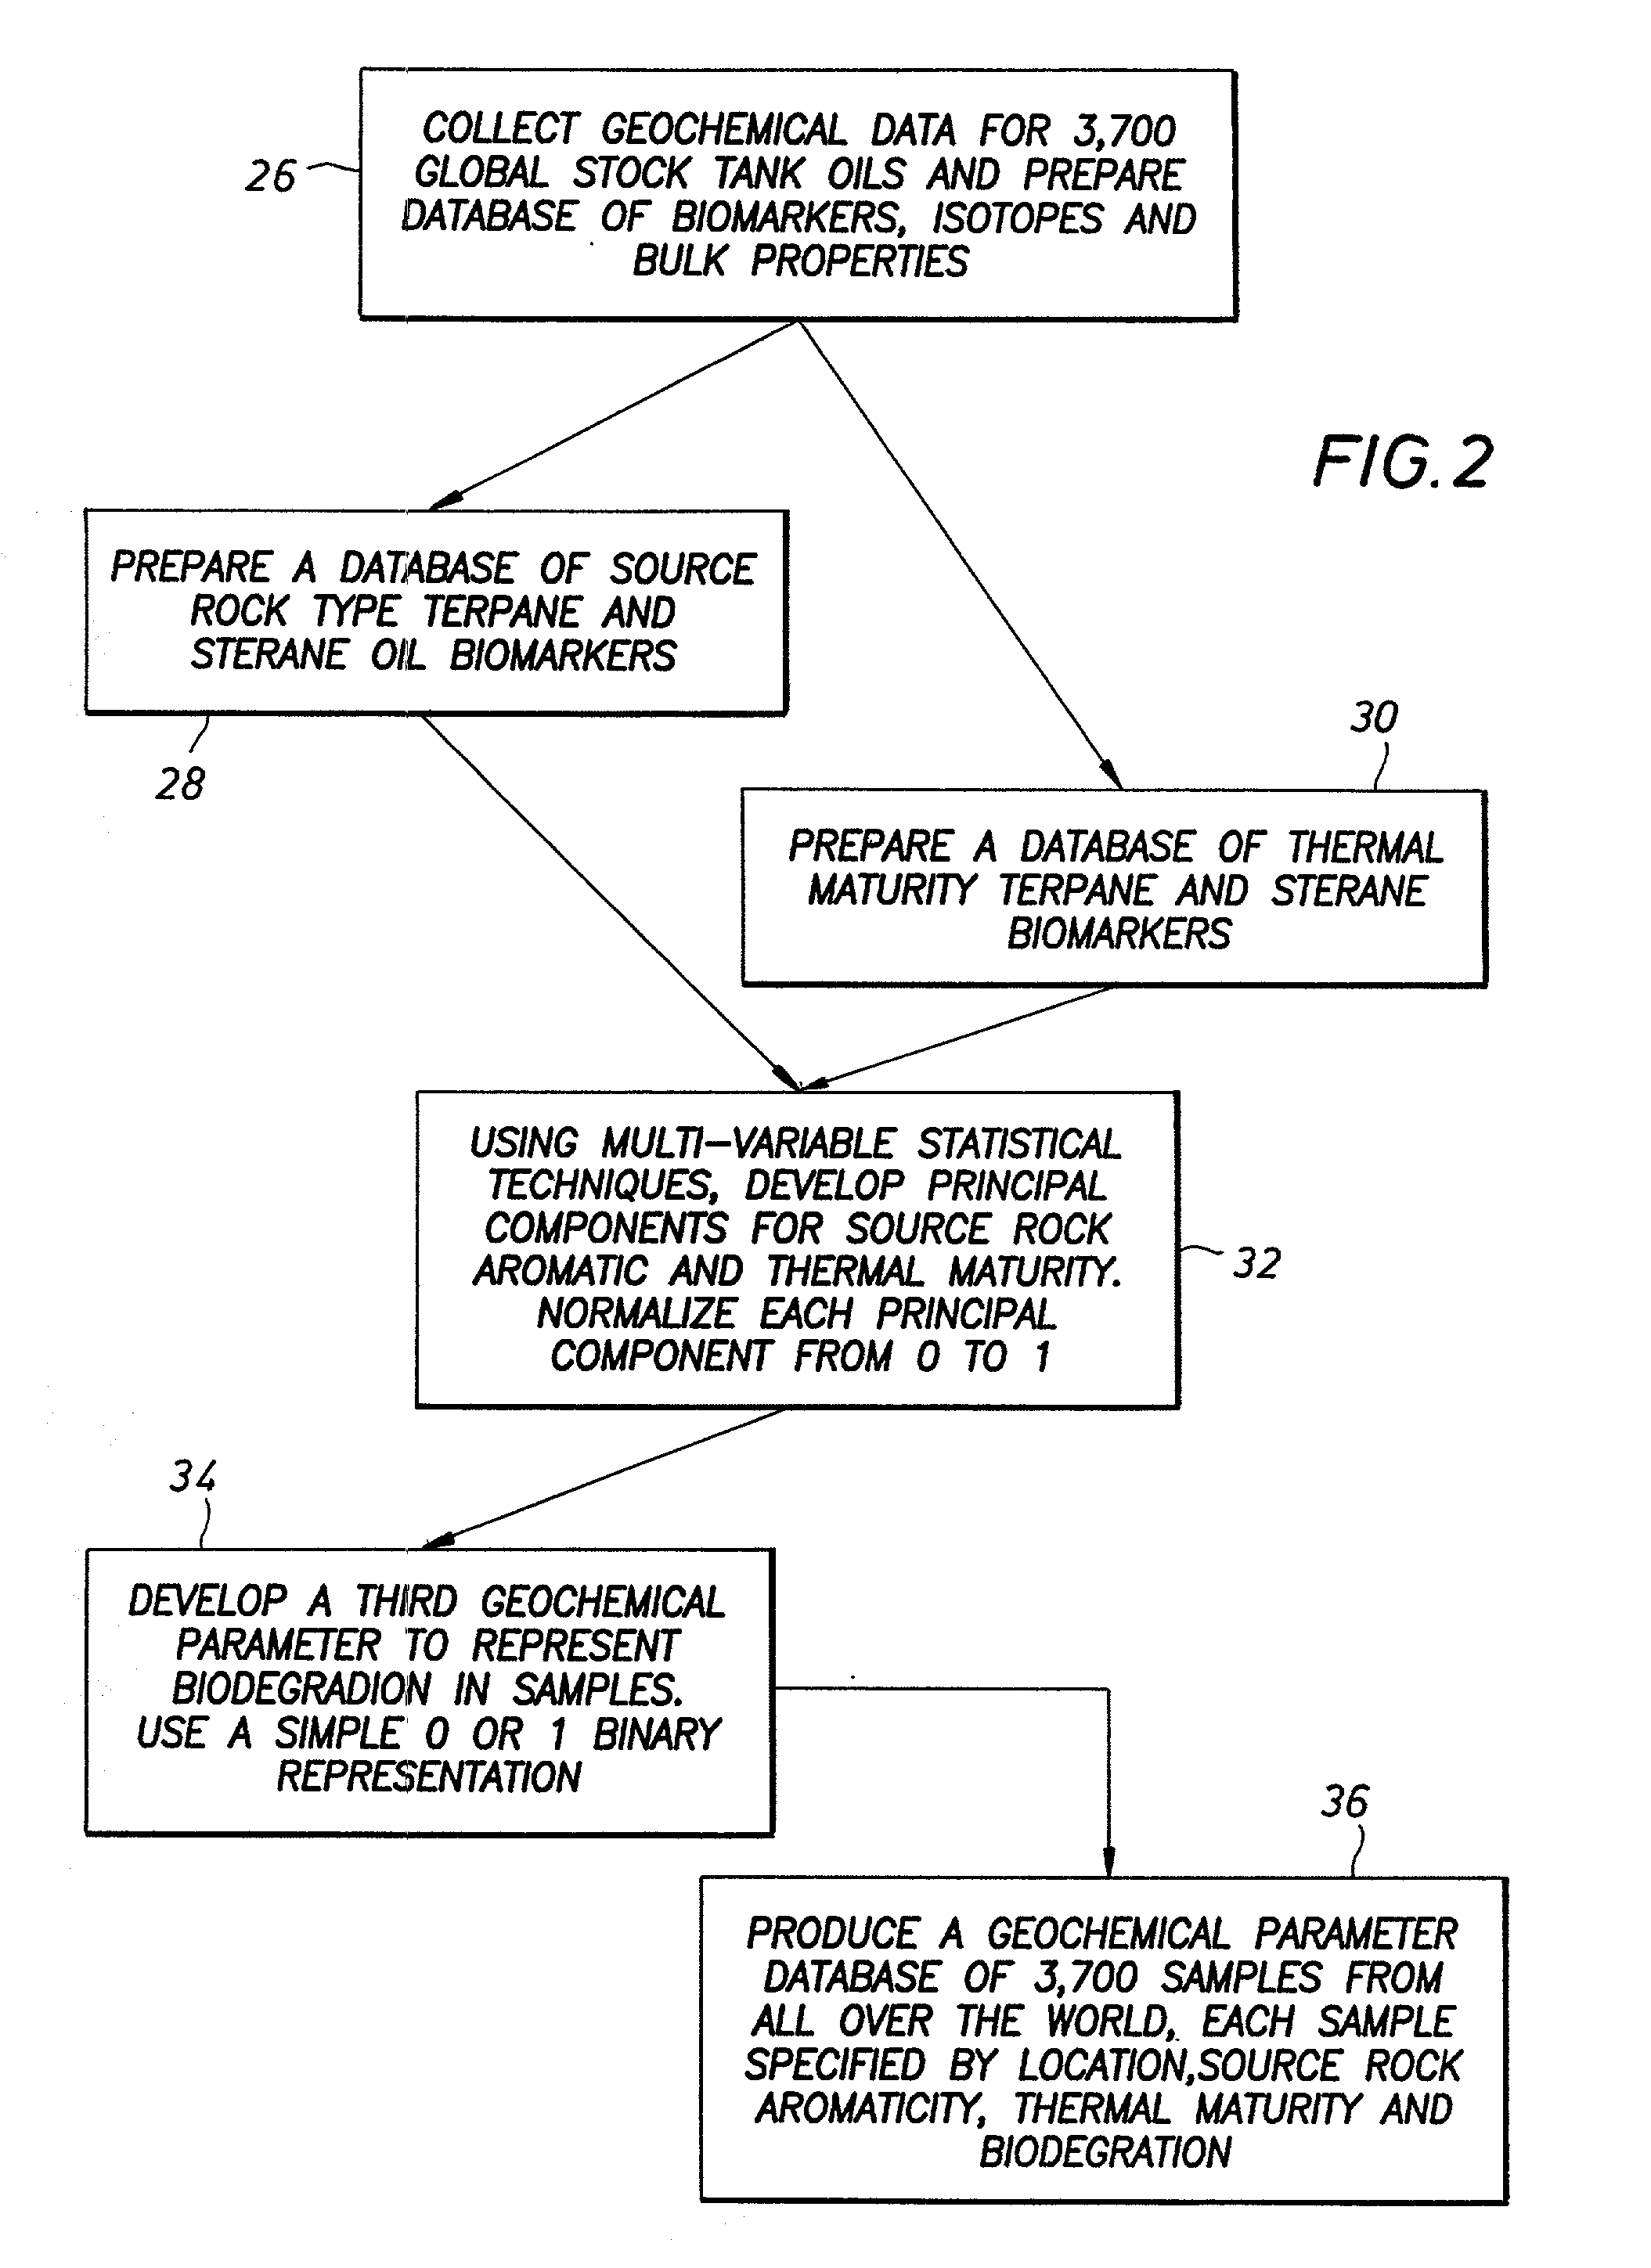 Method and apparatus for simulating PVT parameters